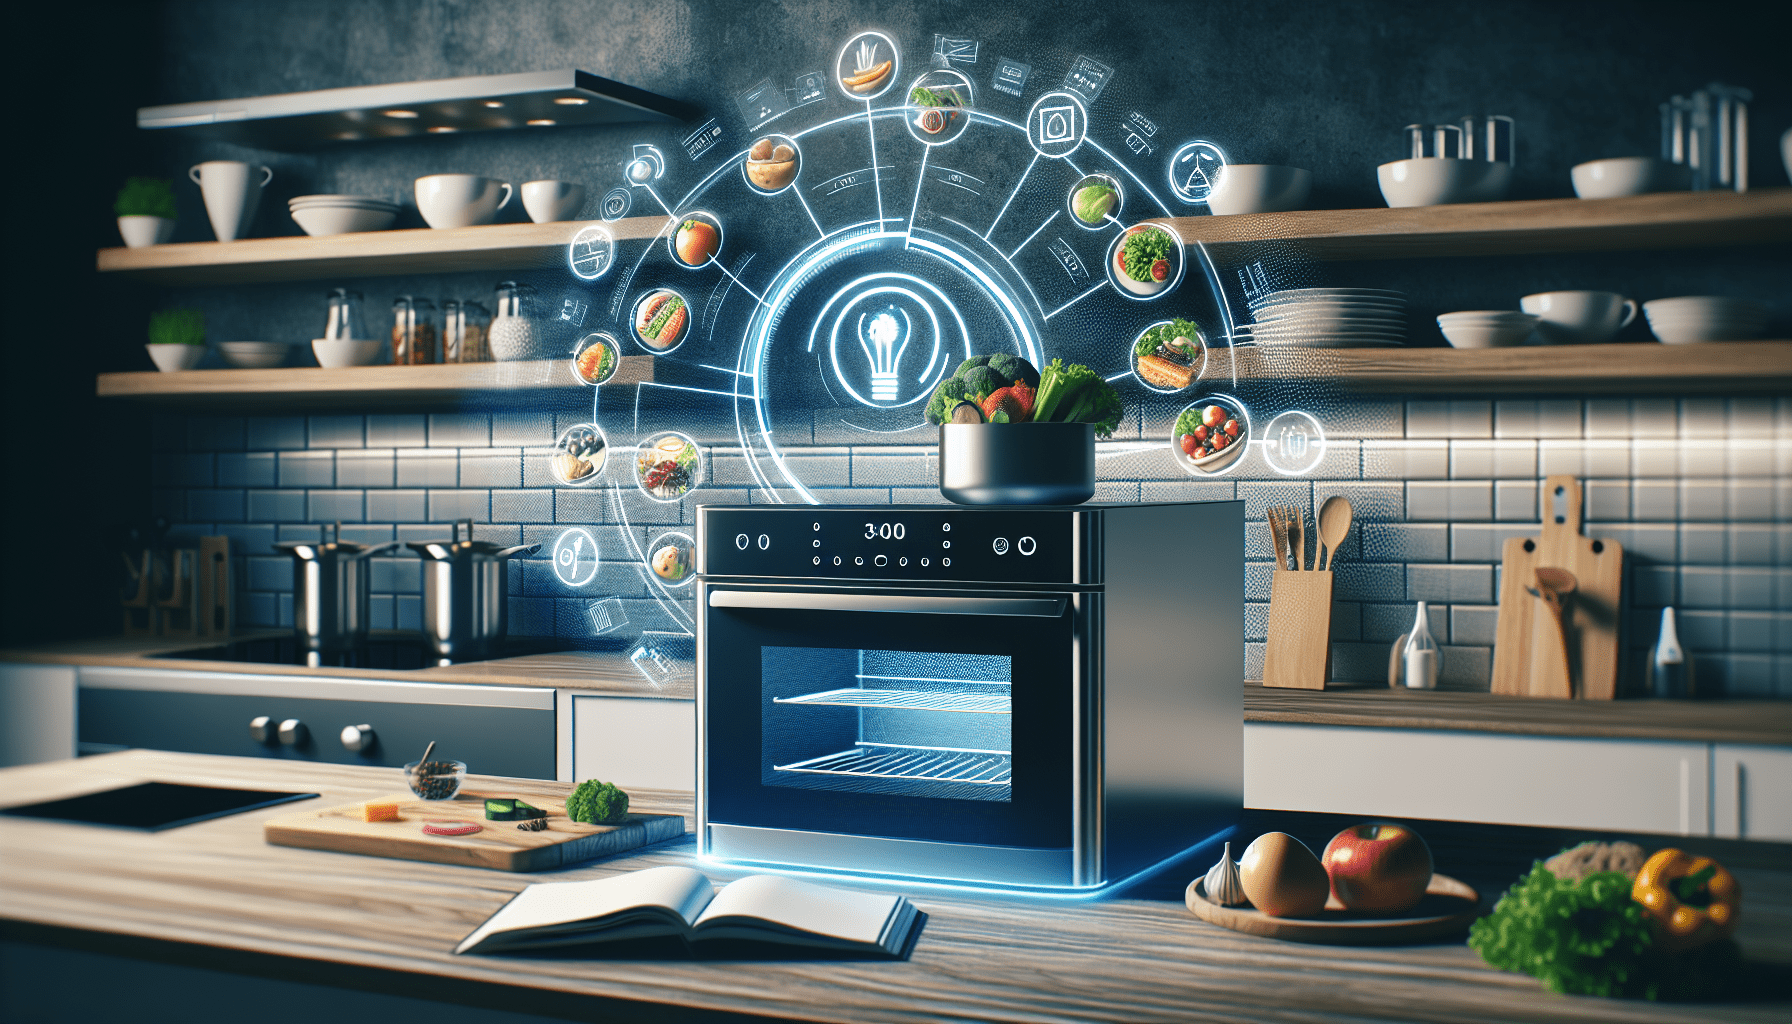 What Can Smart Appliances Do With Food?